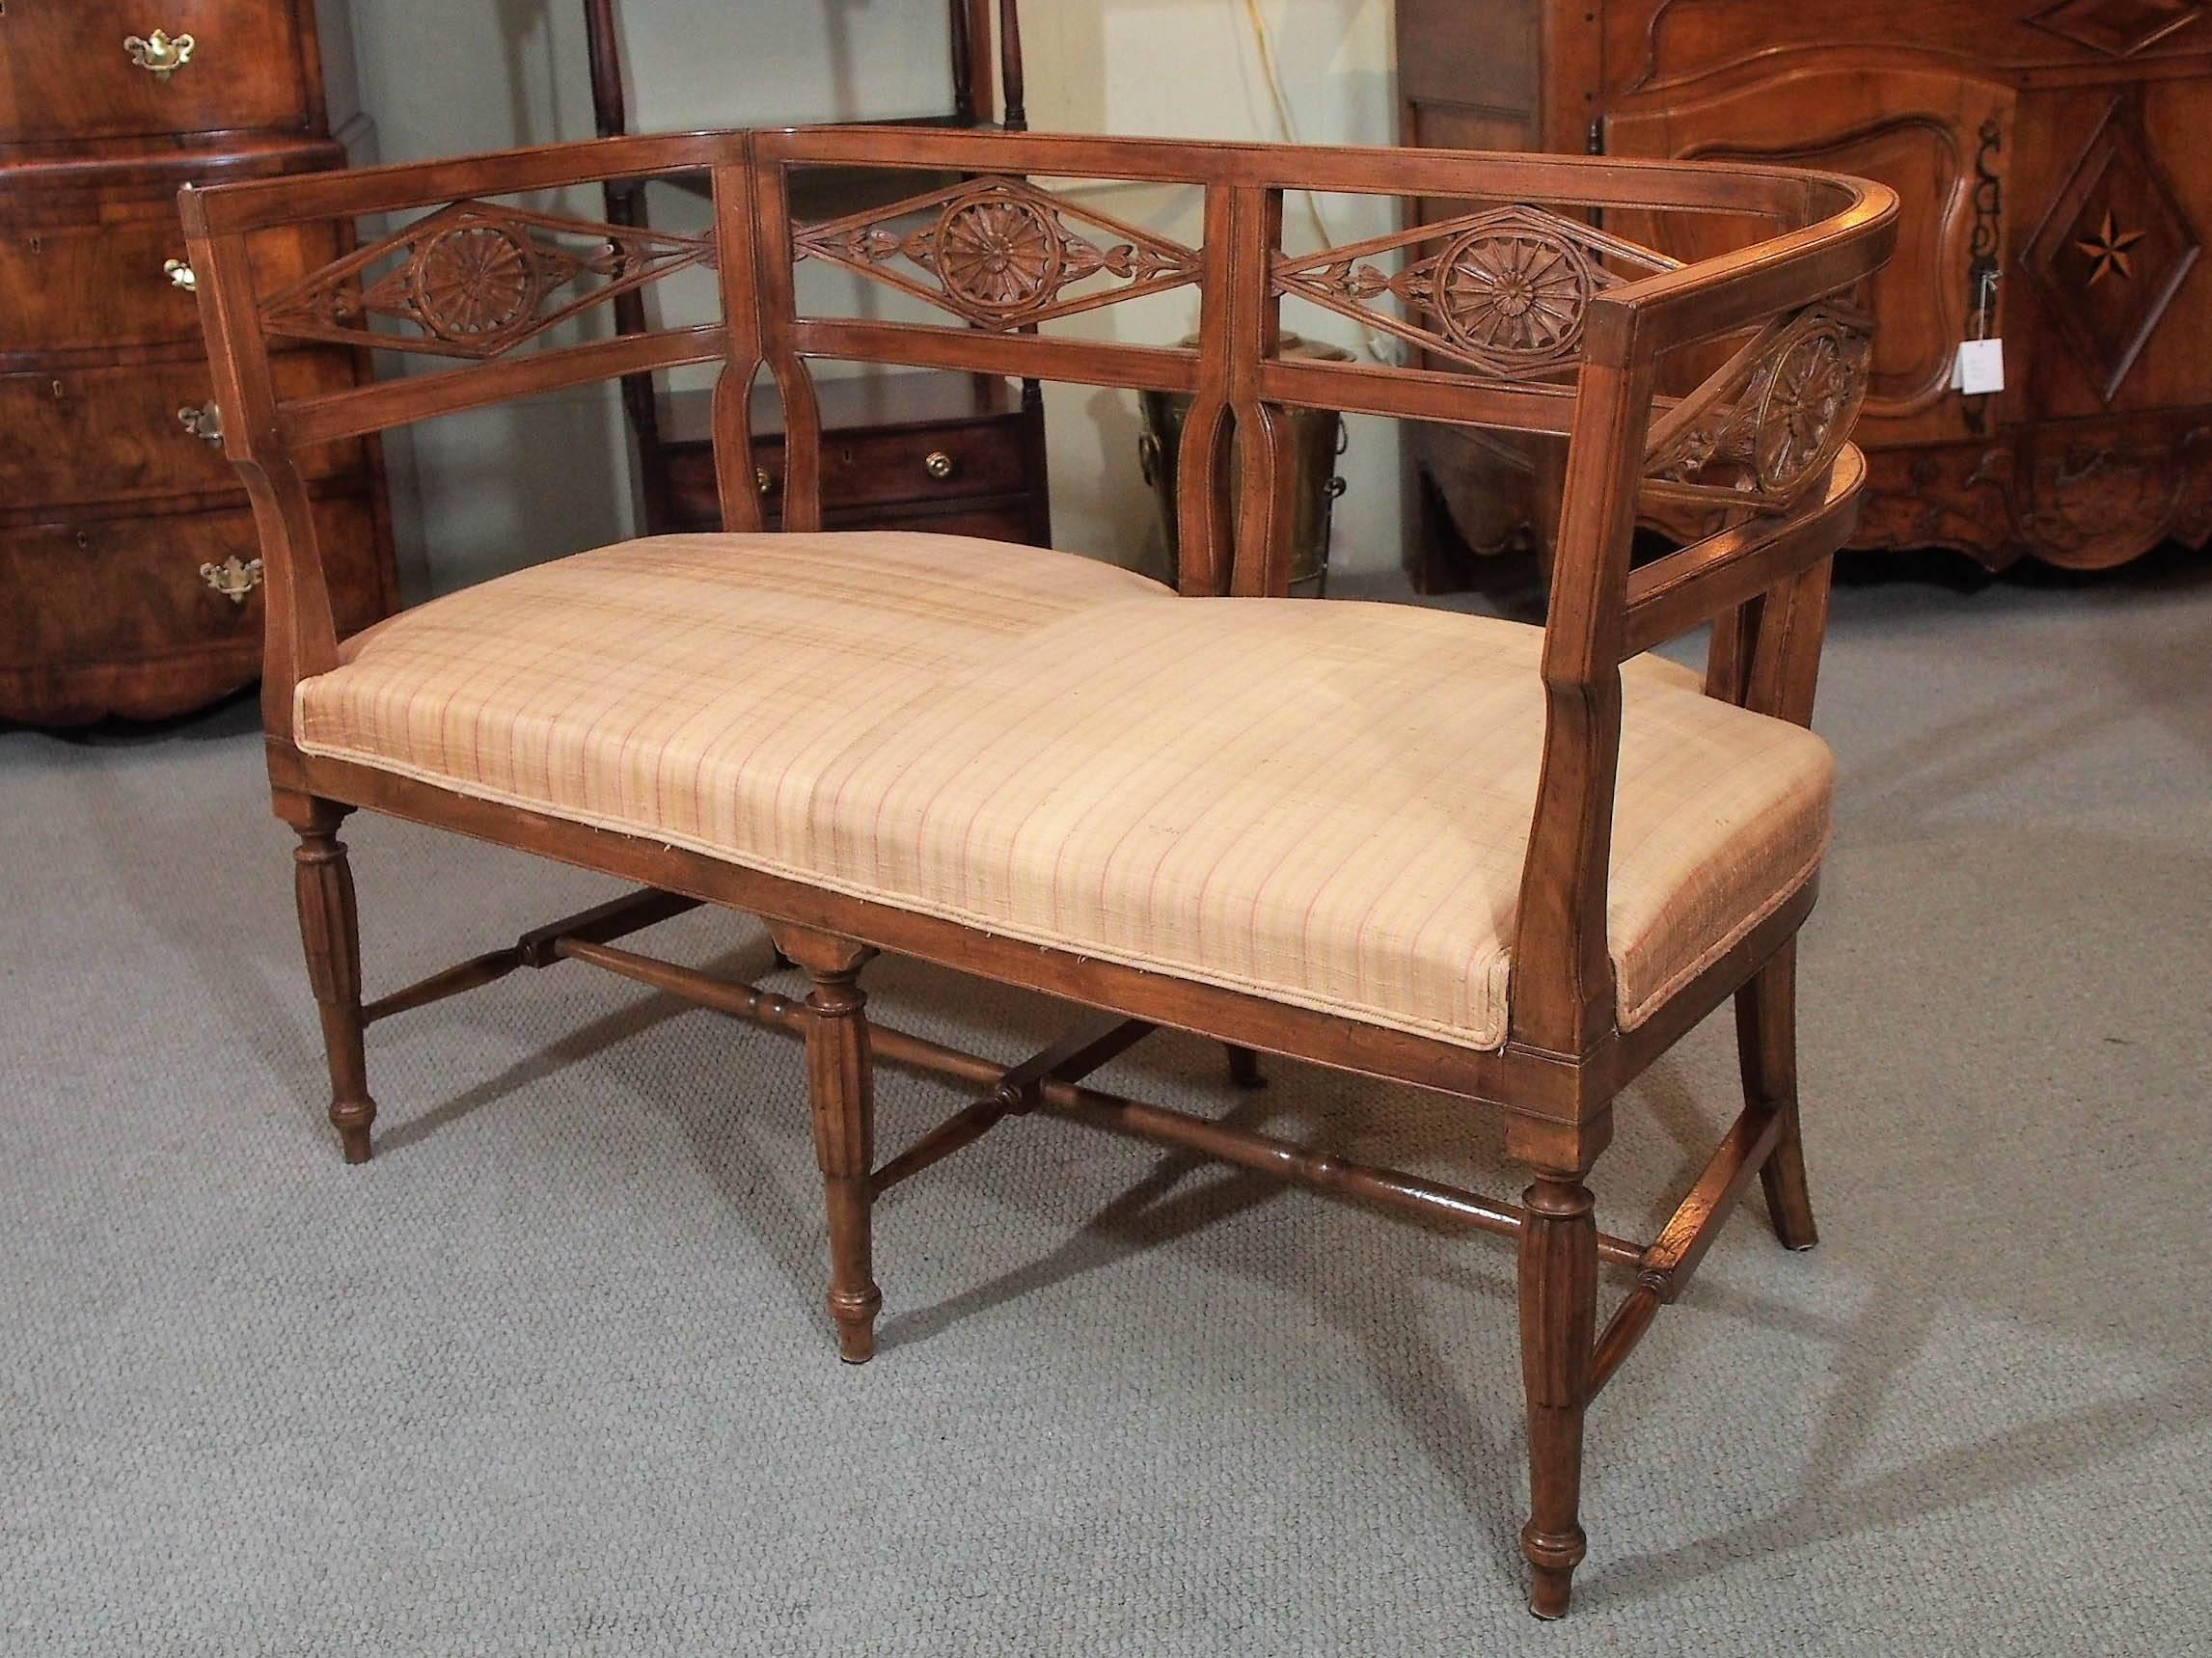 Antique French fruitwood settee. Directoire style, circa 1850.